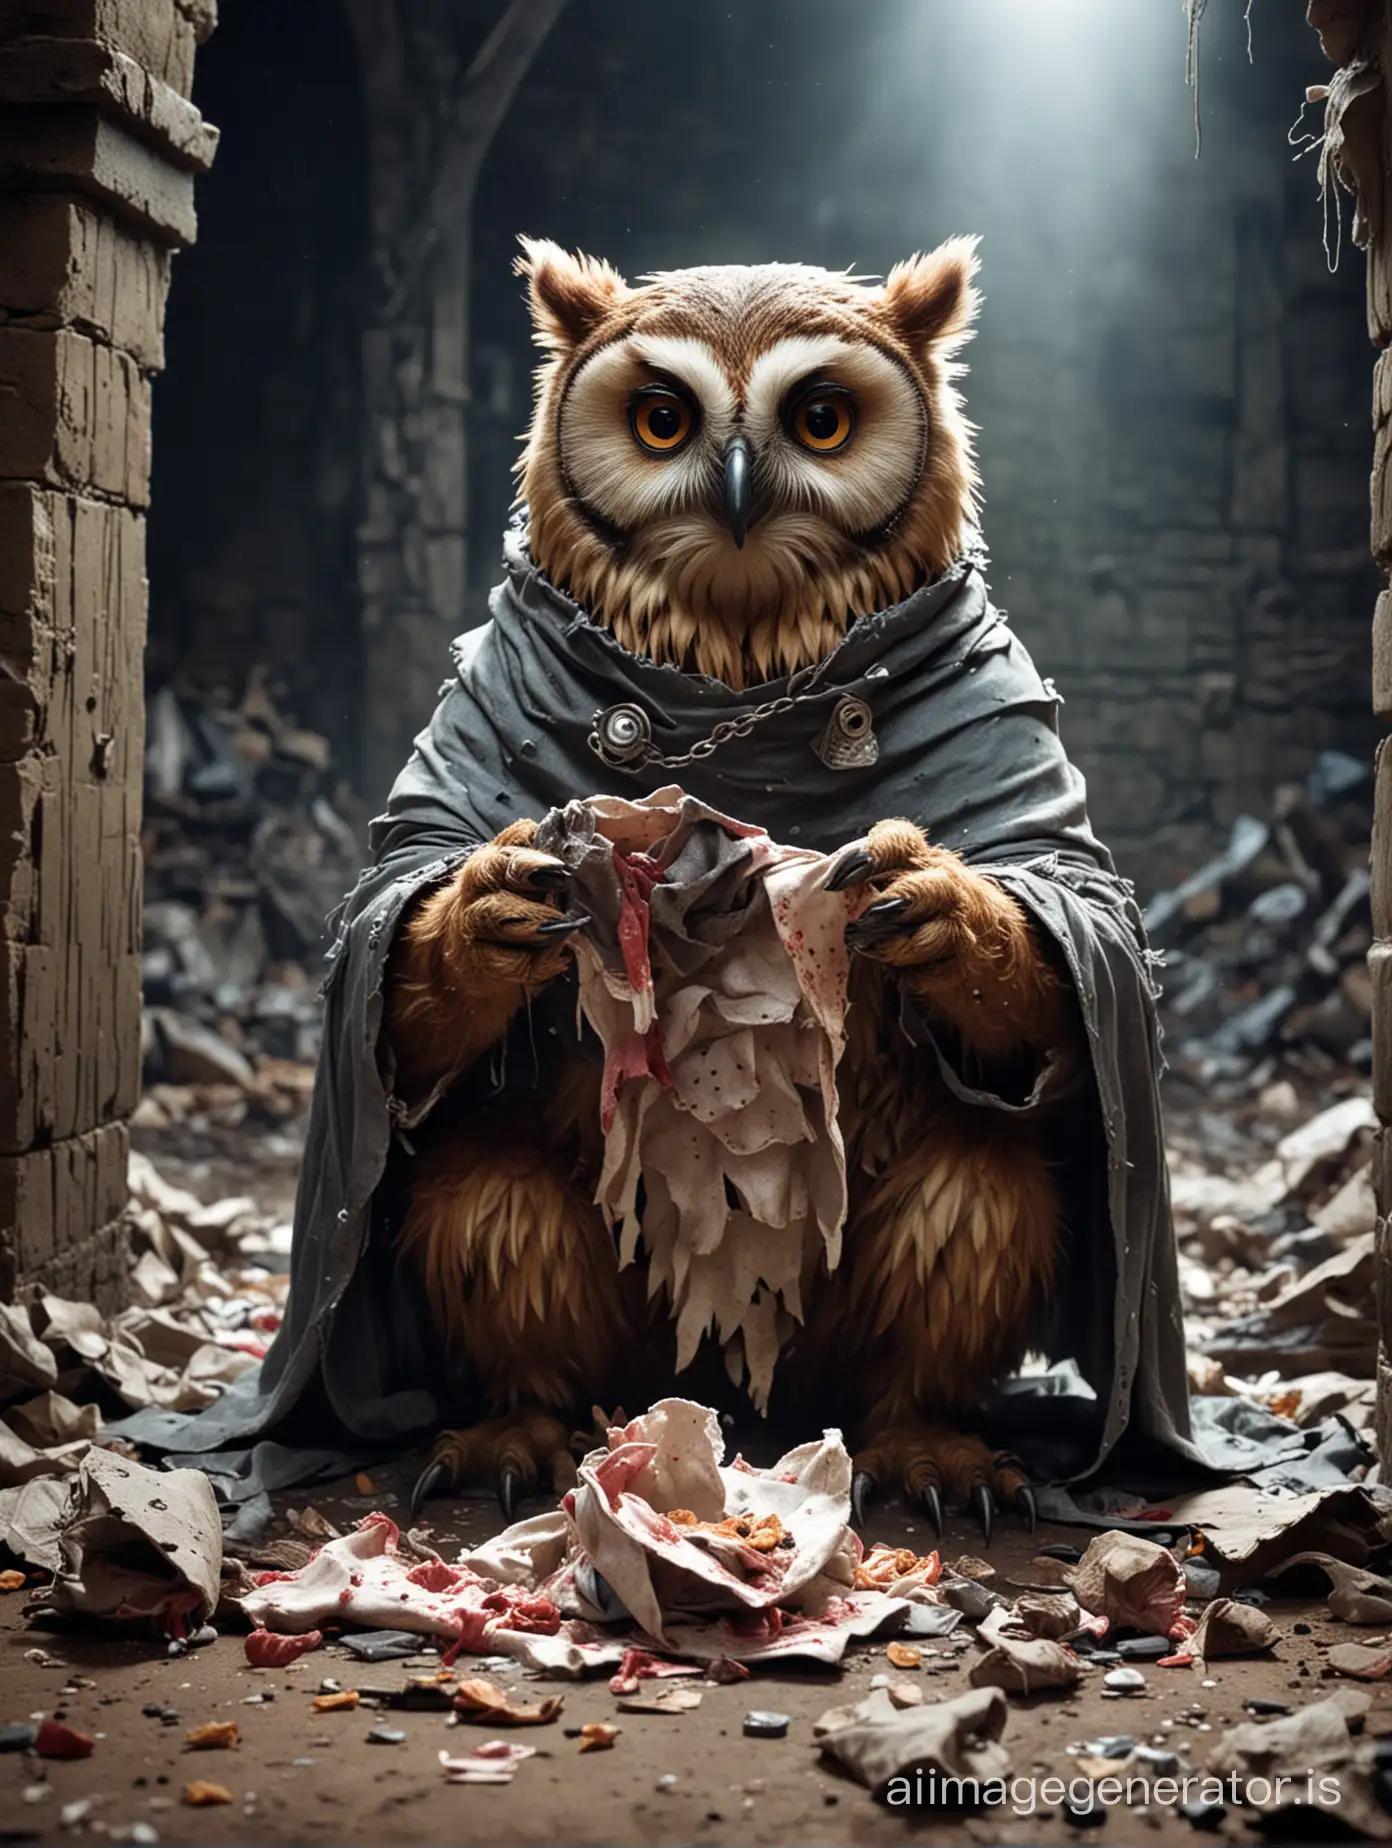 BearOwl-Feasting-on-Ripped-Clothes-in-Dungeon